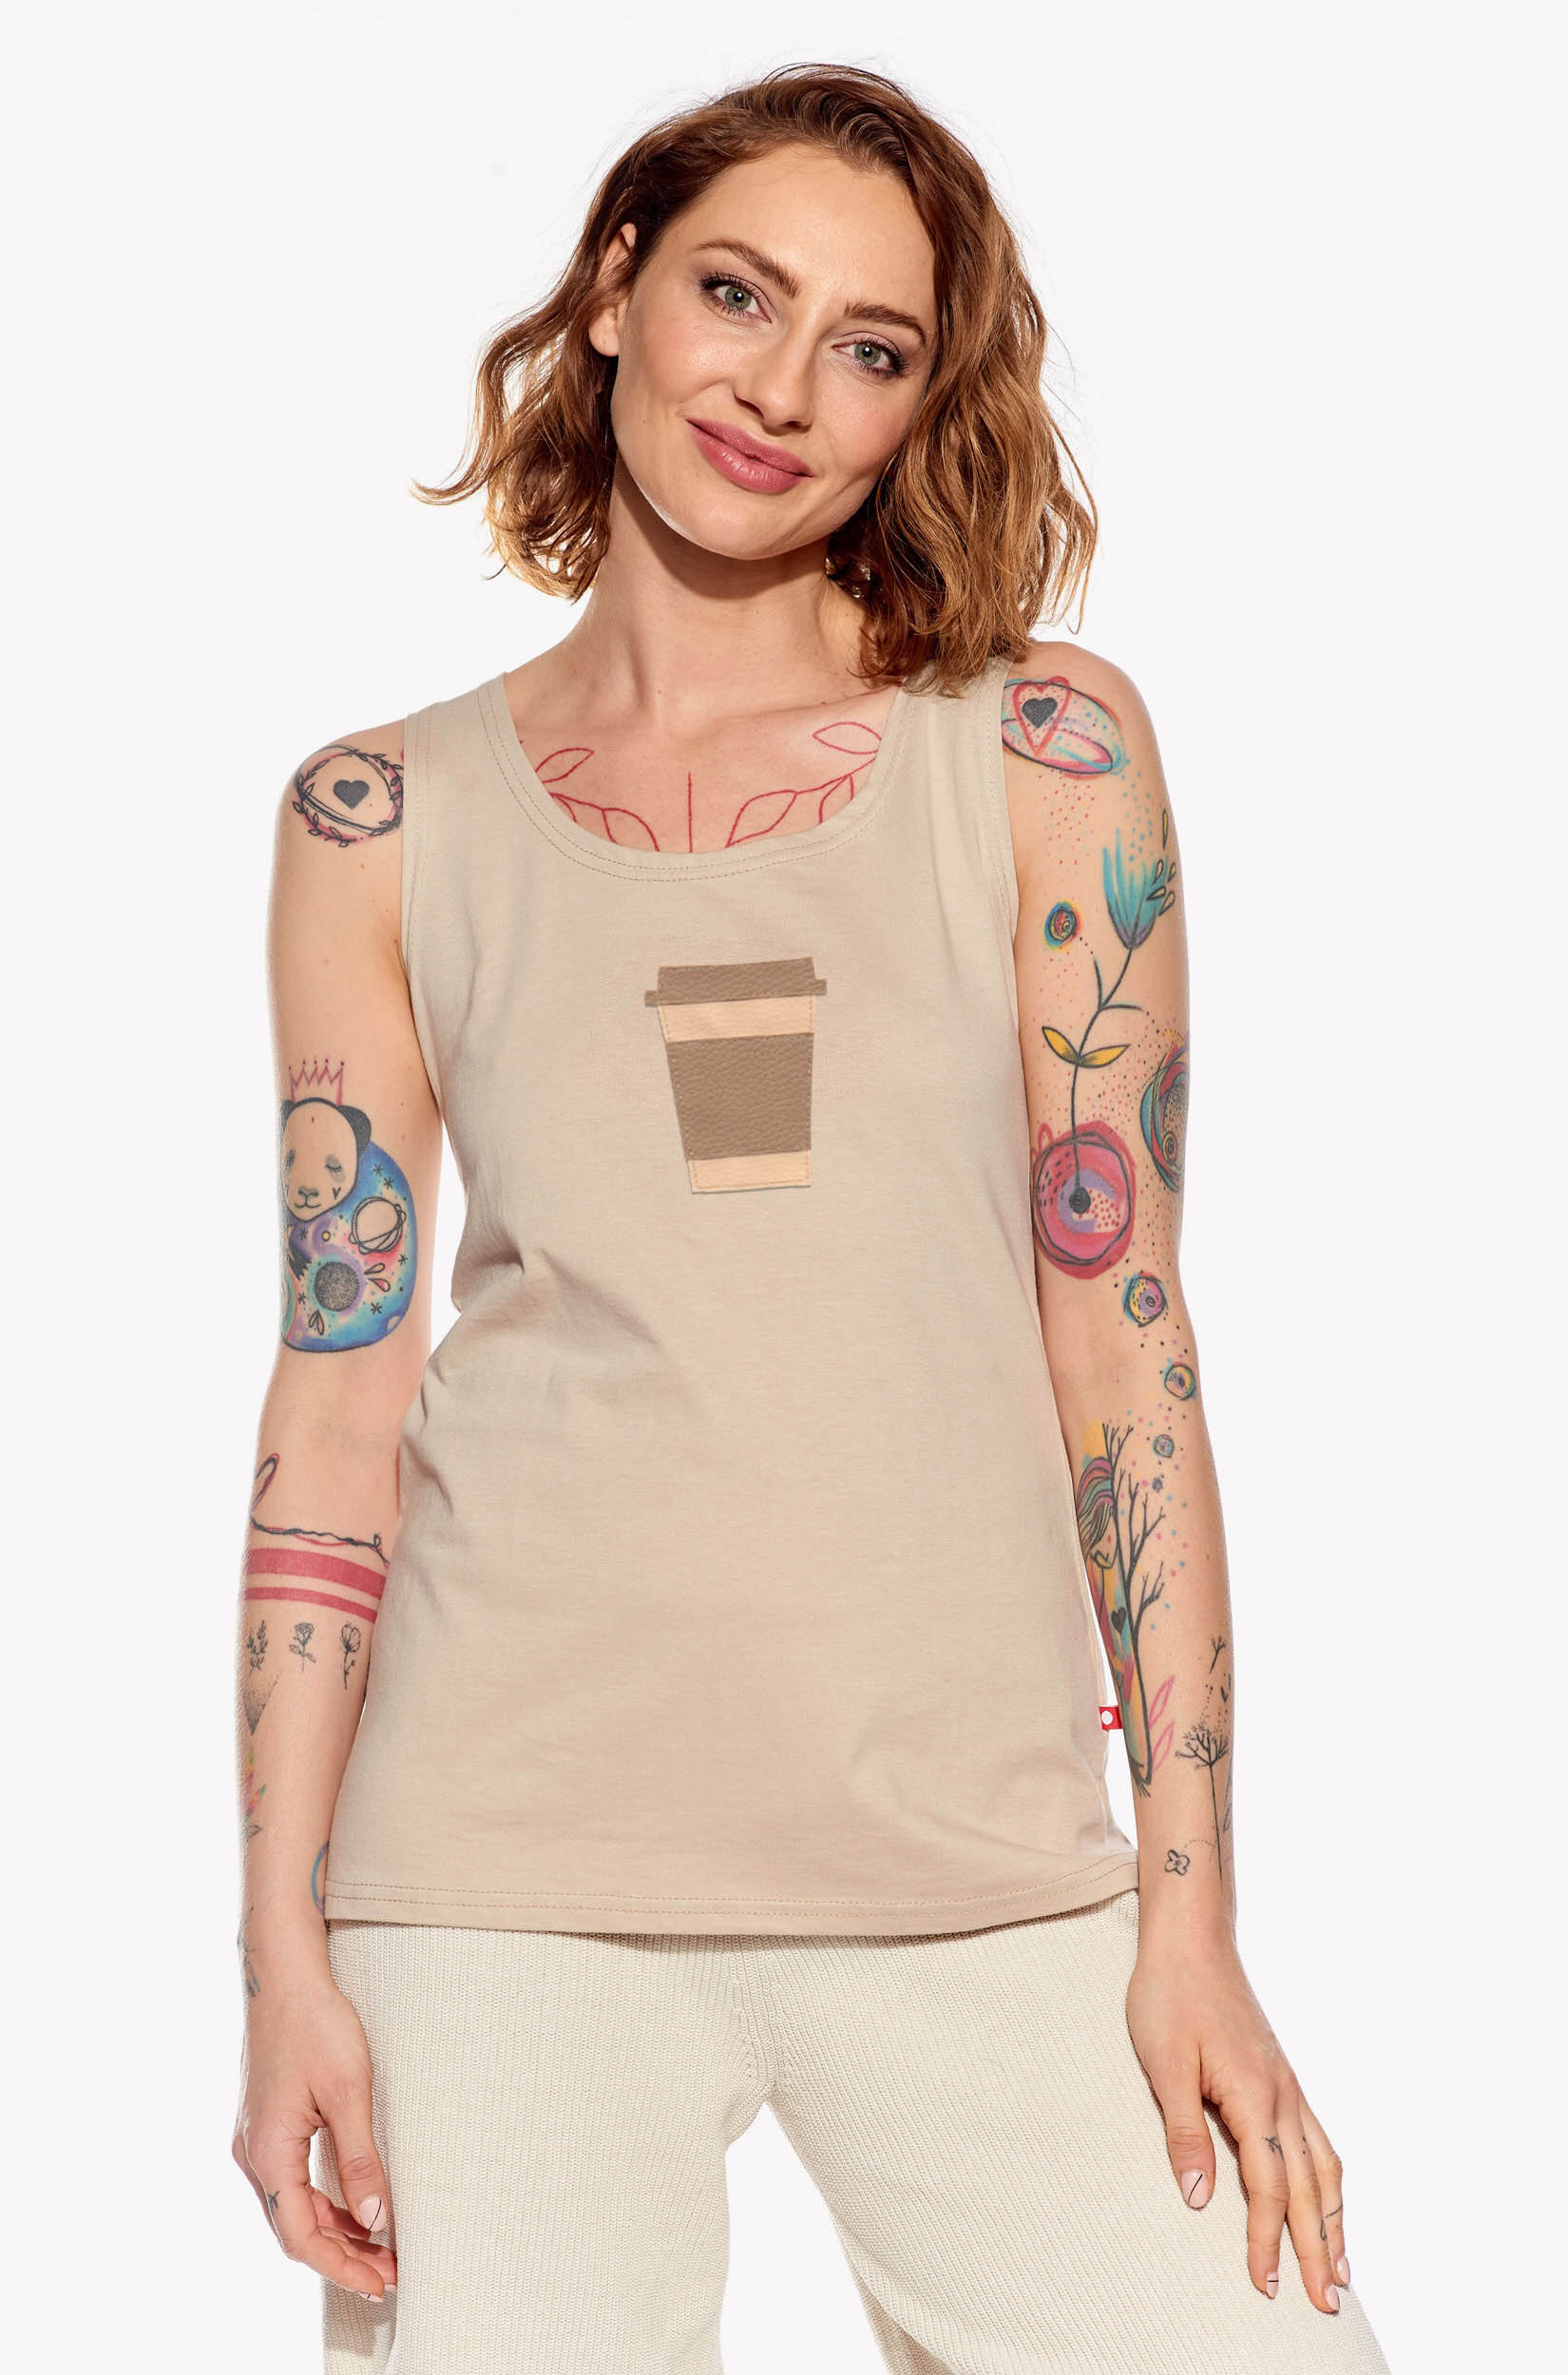 Singlet with coffee